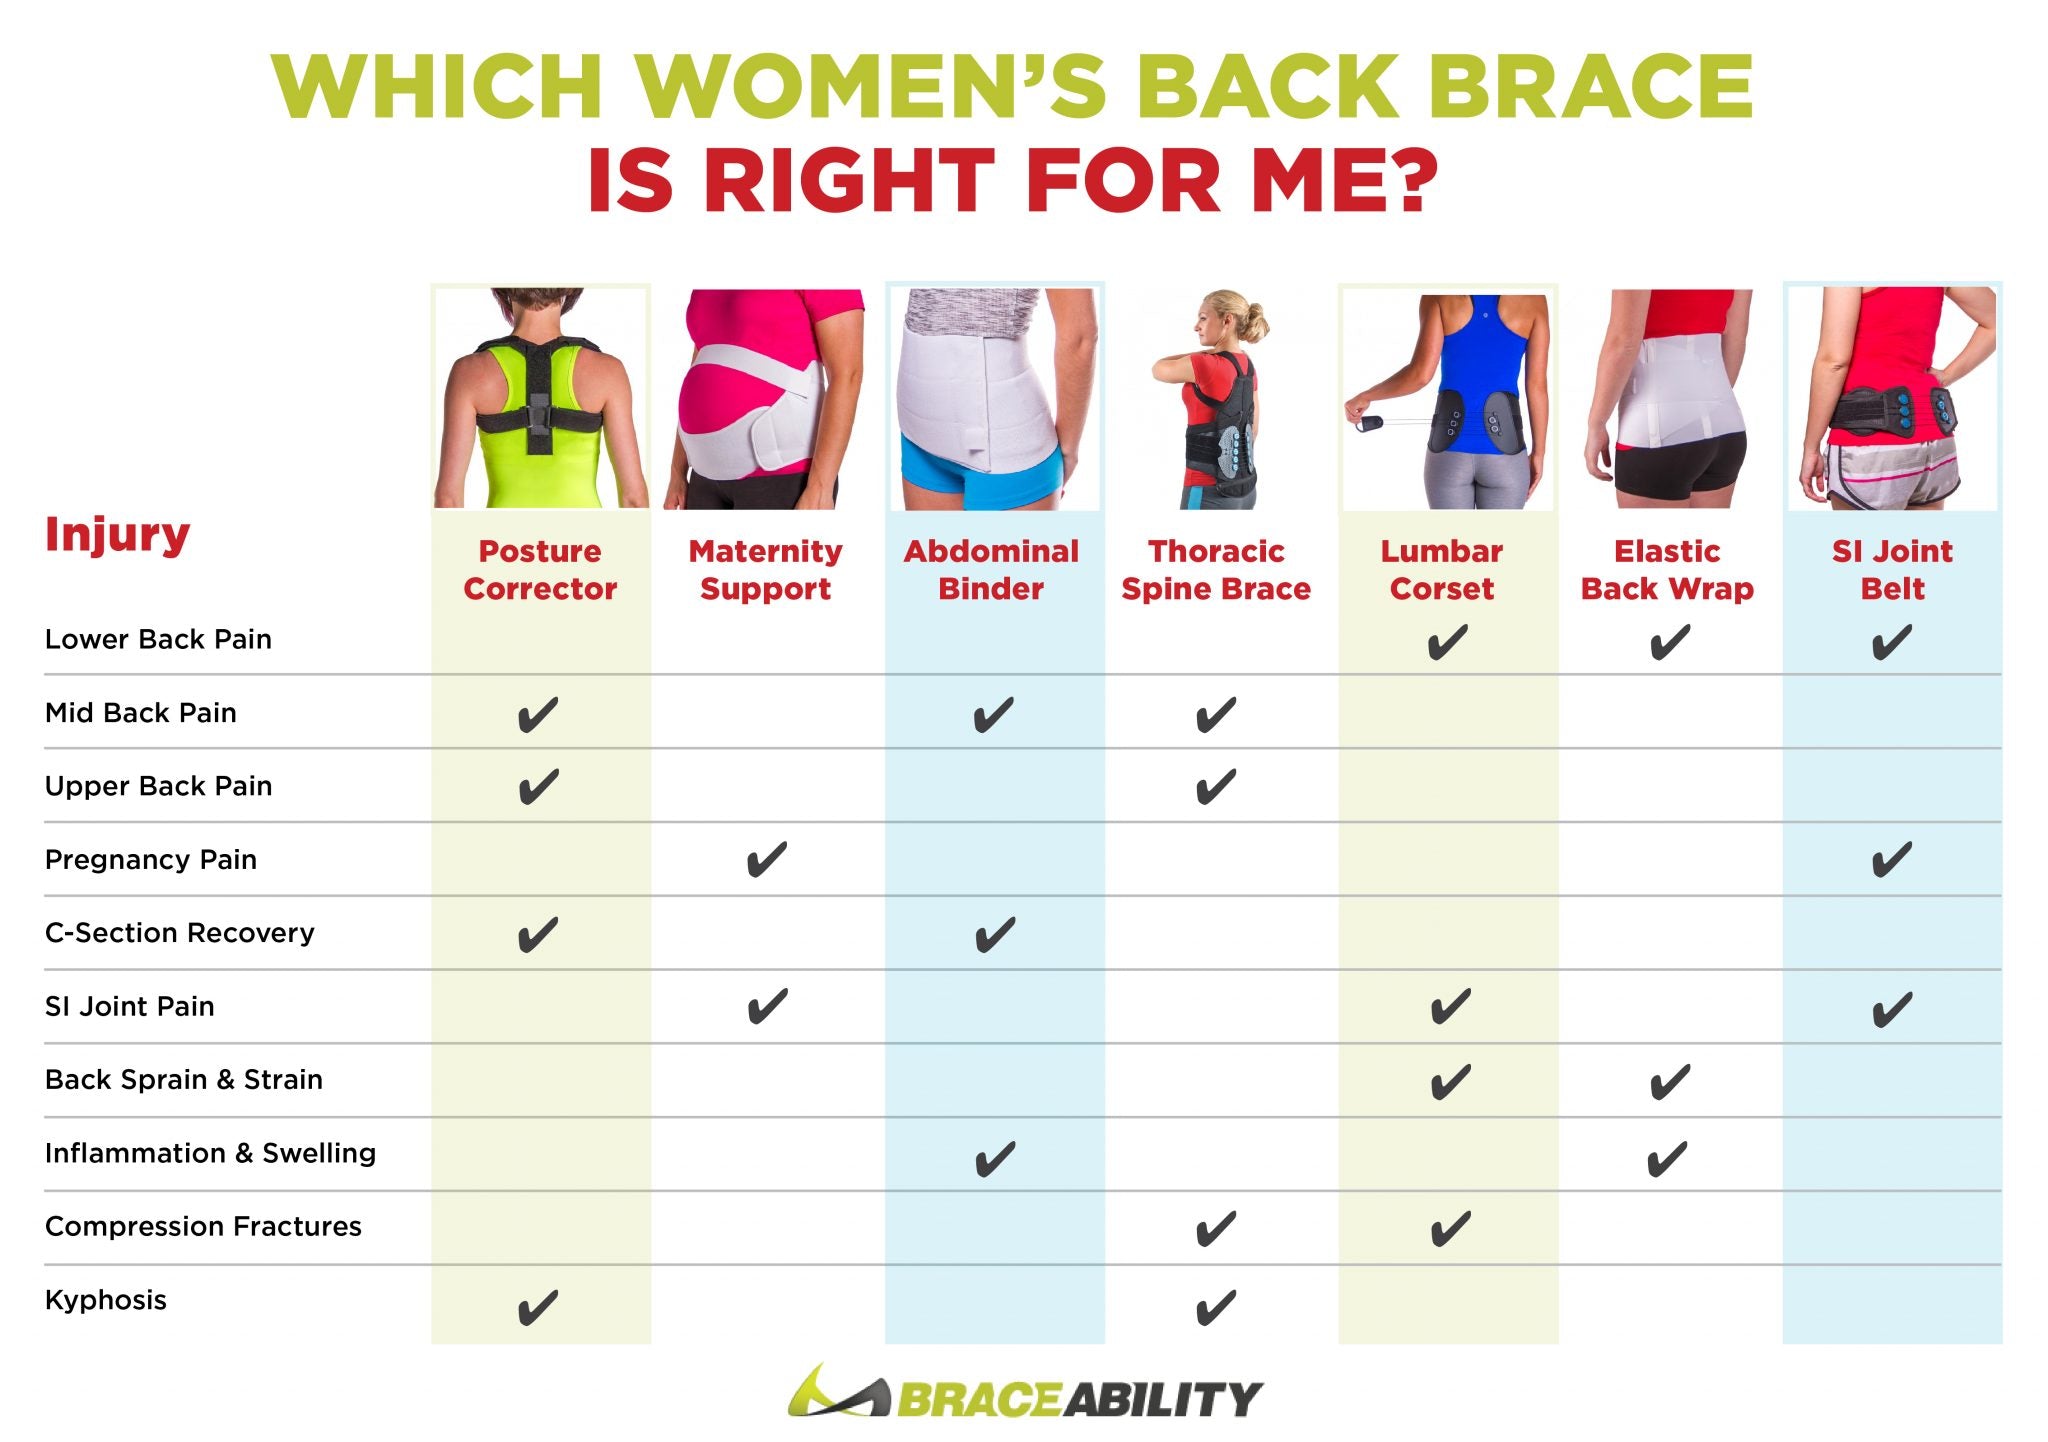 Use this list of back braces to determine which style of back brace you need for your specific injury